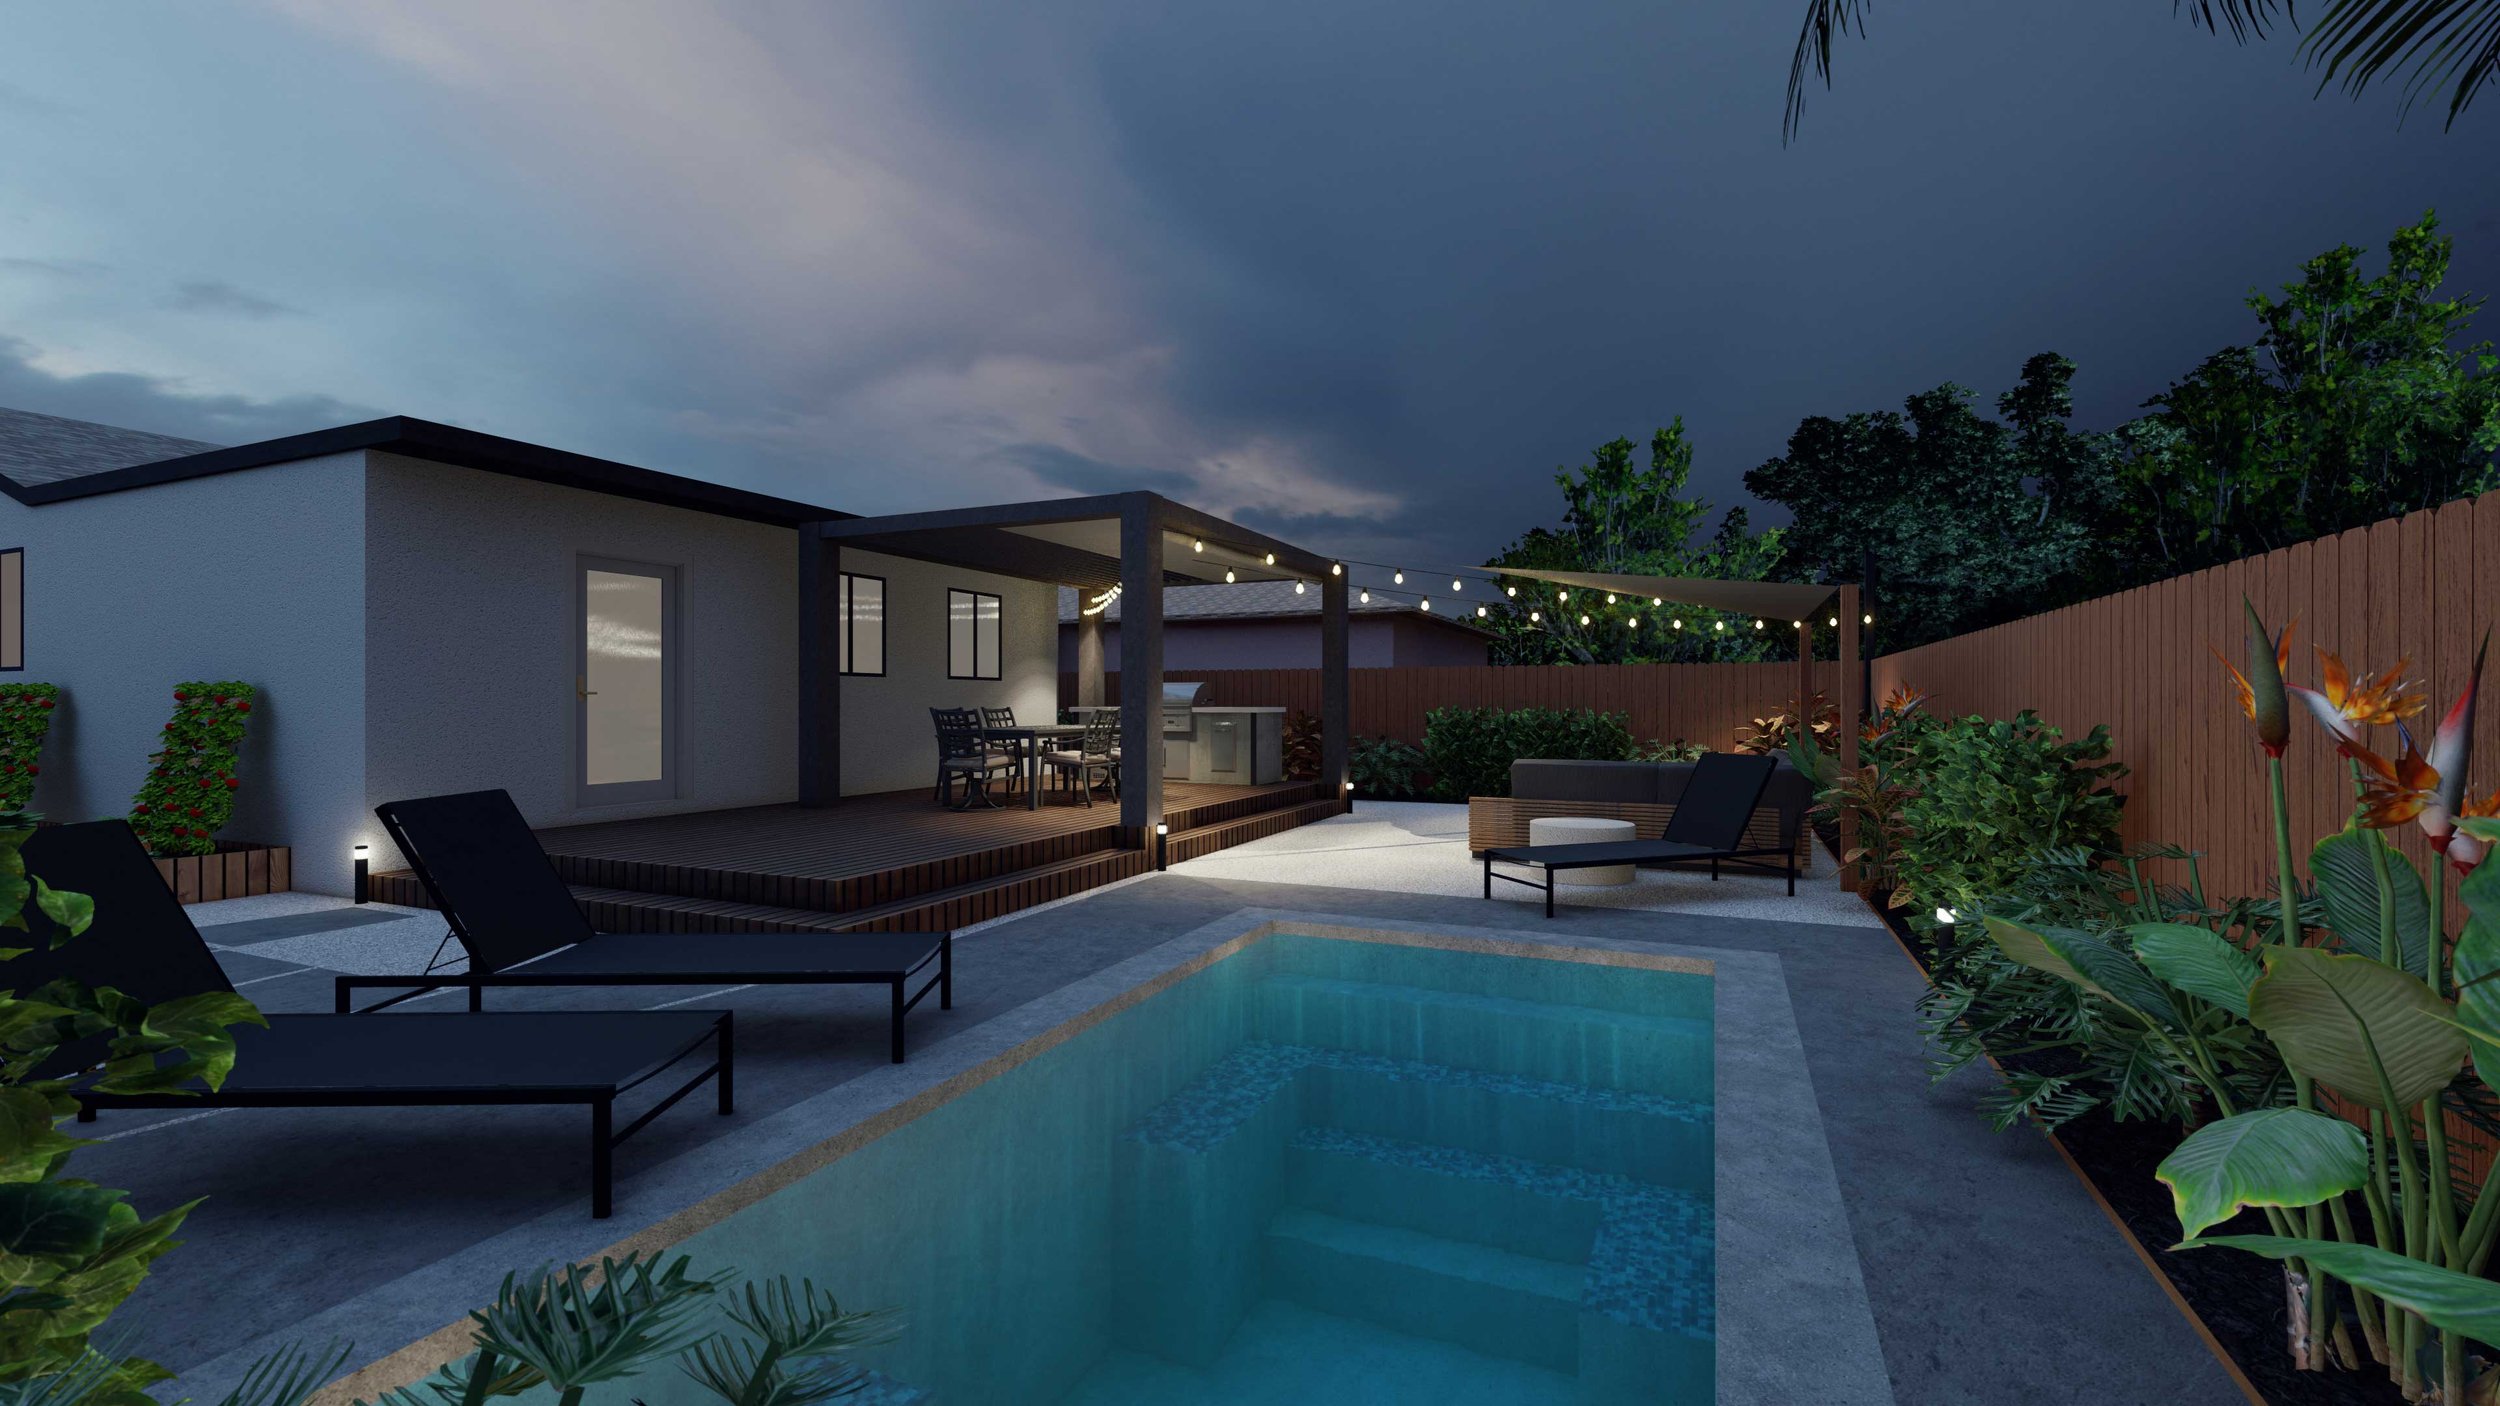 Nighttime view of backyard with plunge pool and outdoor lounge areas